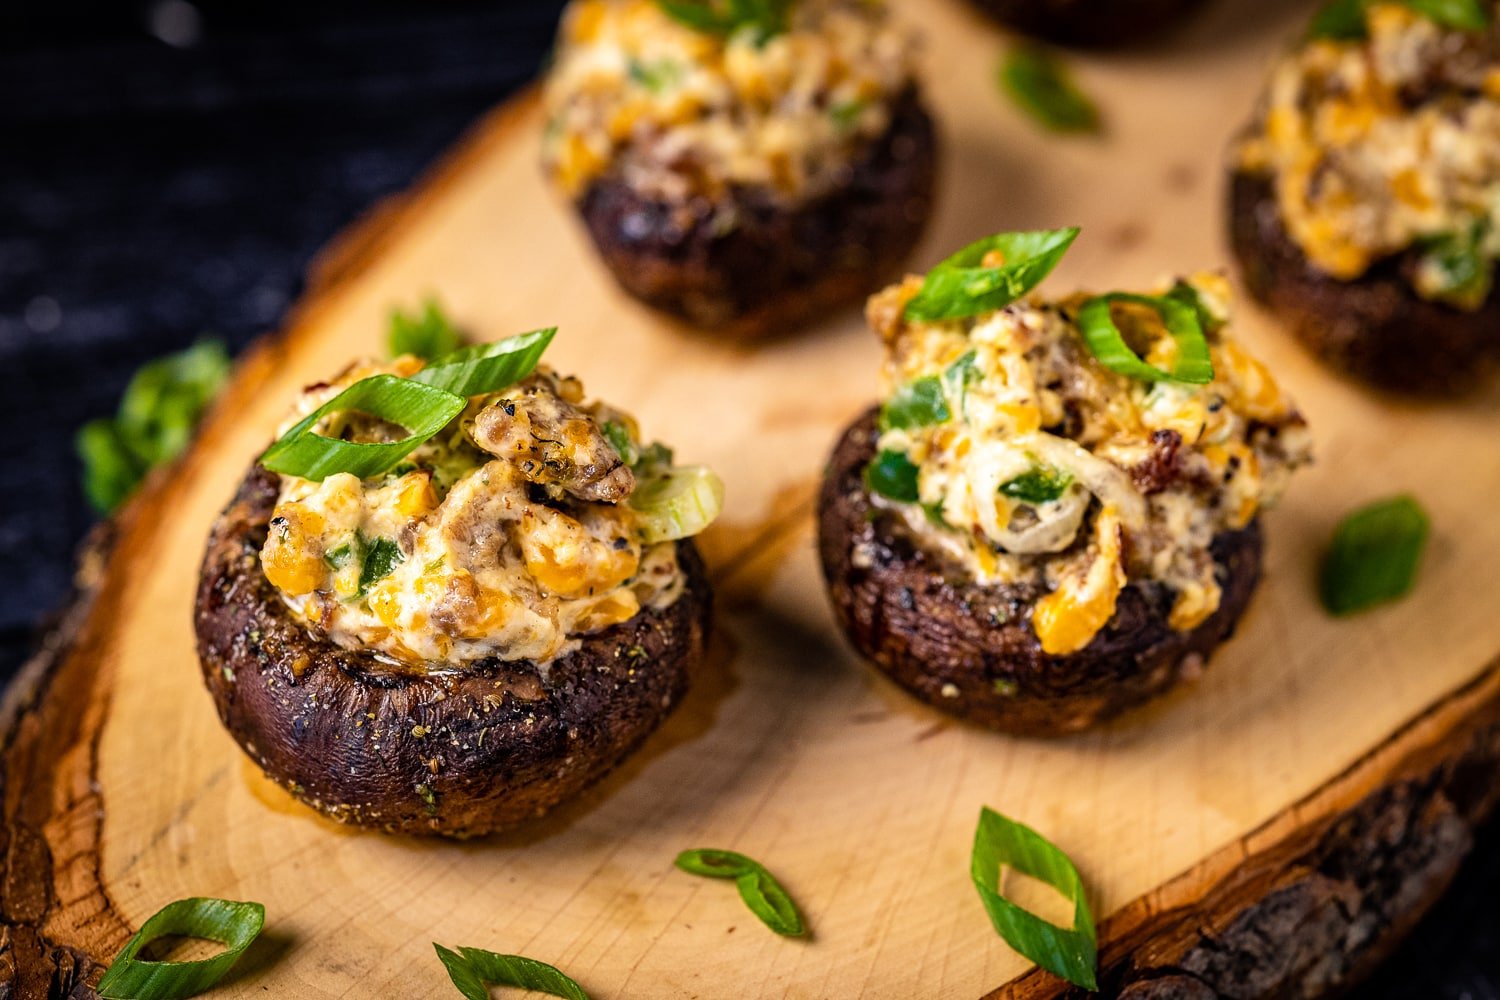 Grilled stuffed mushrooms on a wooden serving board.